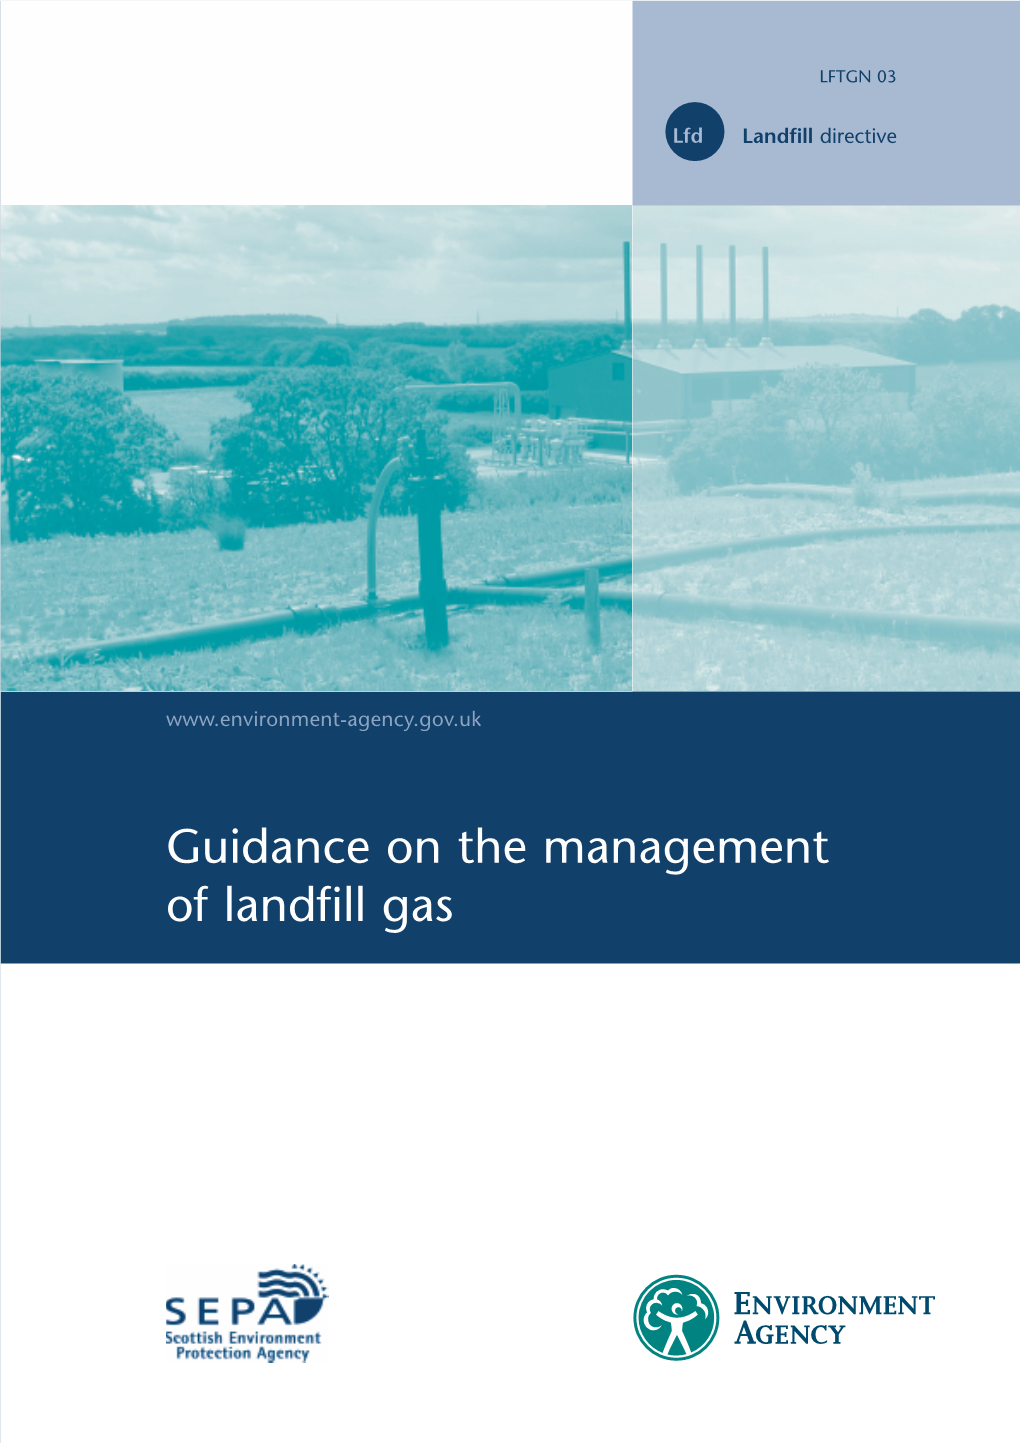 Guidance on the Management of Landfill Gas